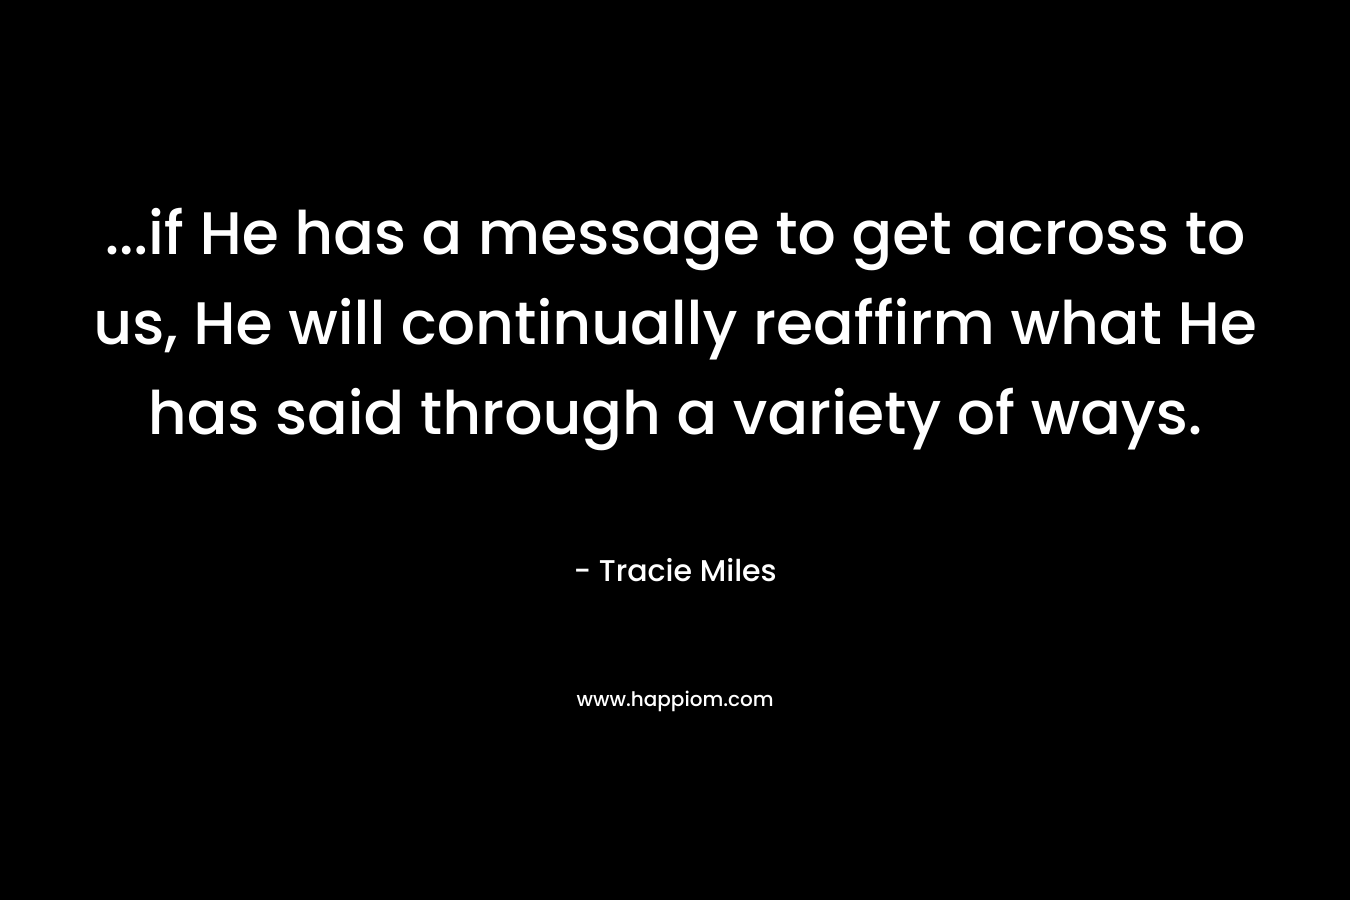 …if He has a message to get across to us, He will continually reaffirm what He has said through a variety of ways. – Tracie Miles